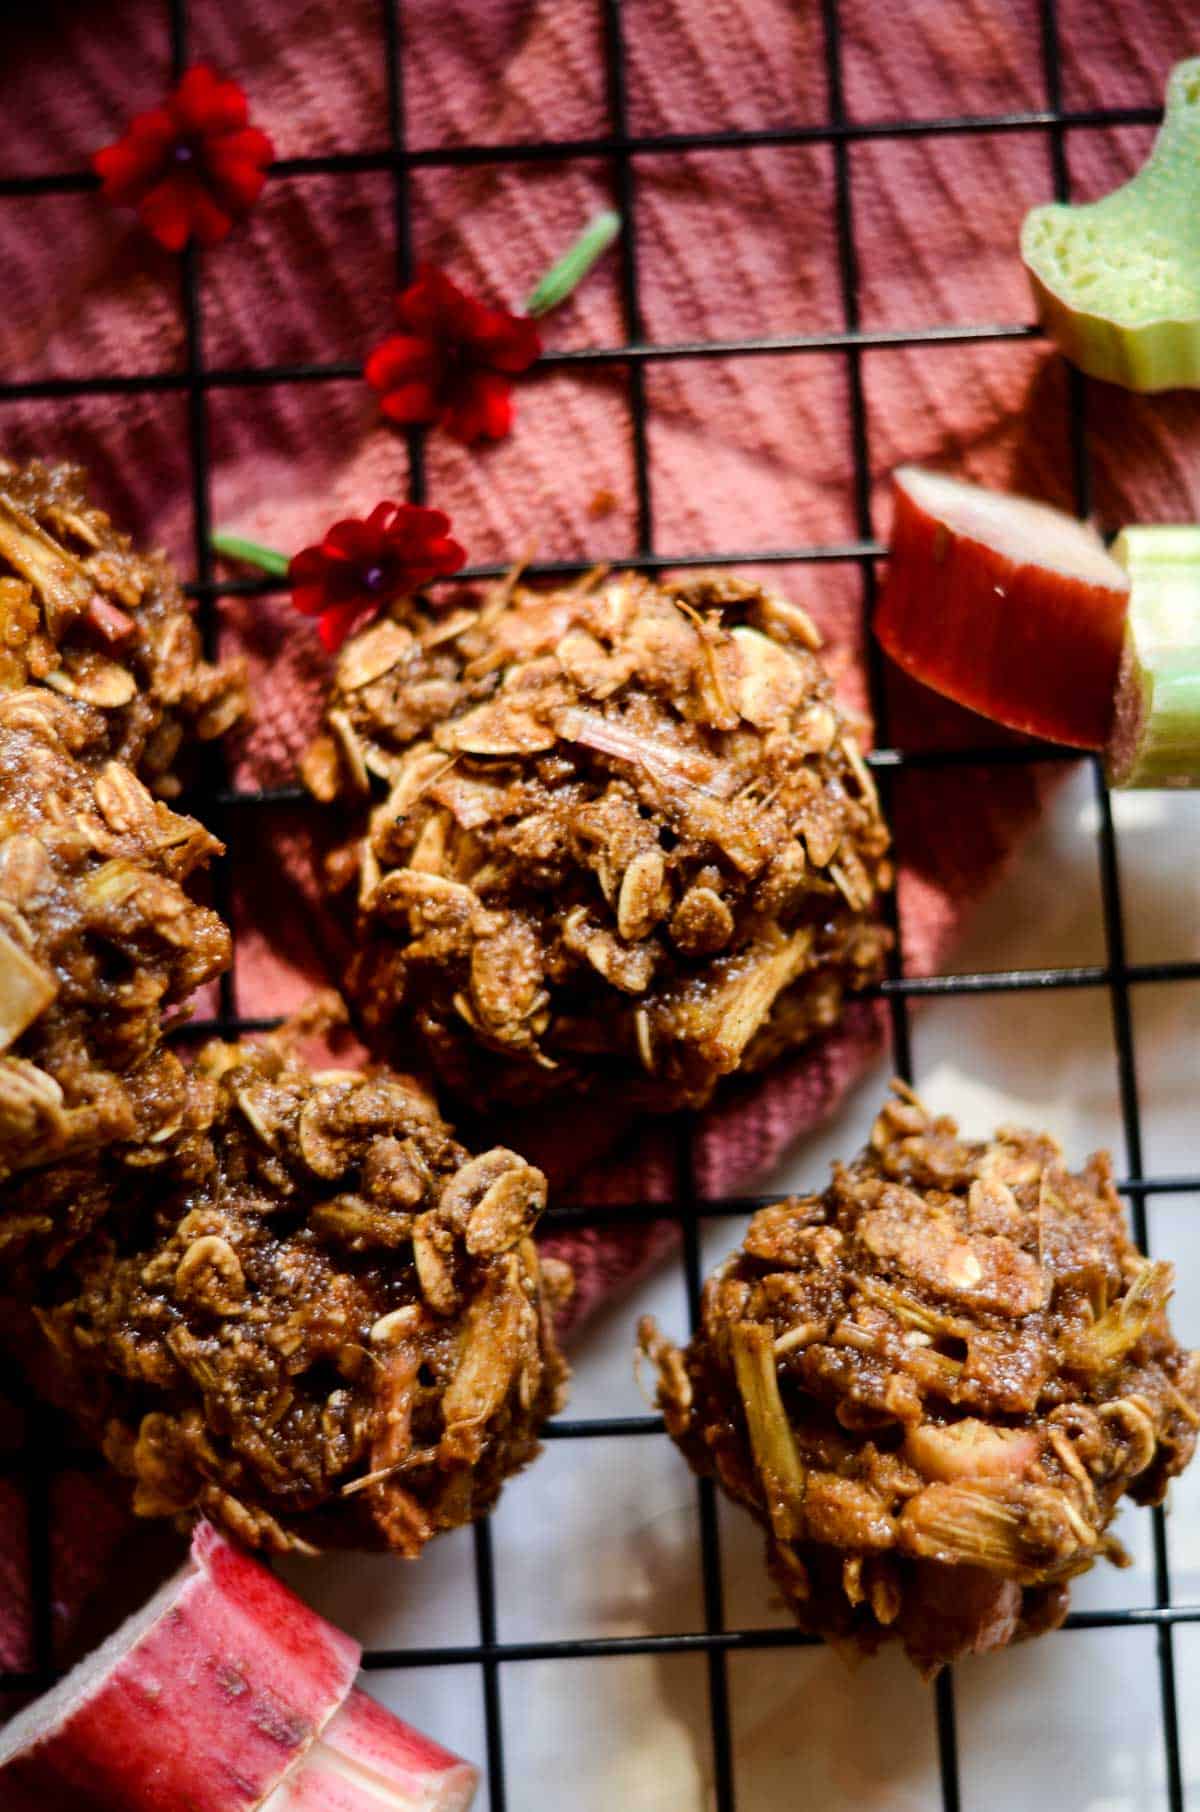 Brown rhubarb oatmeal cookies on a cooling rack with pieces of rhubarb and a pink towel.